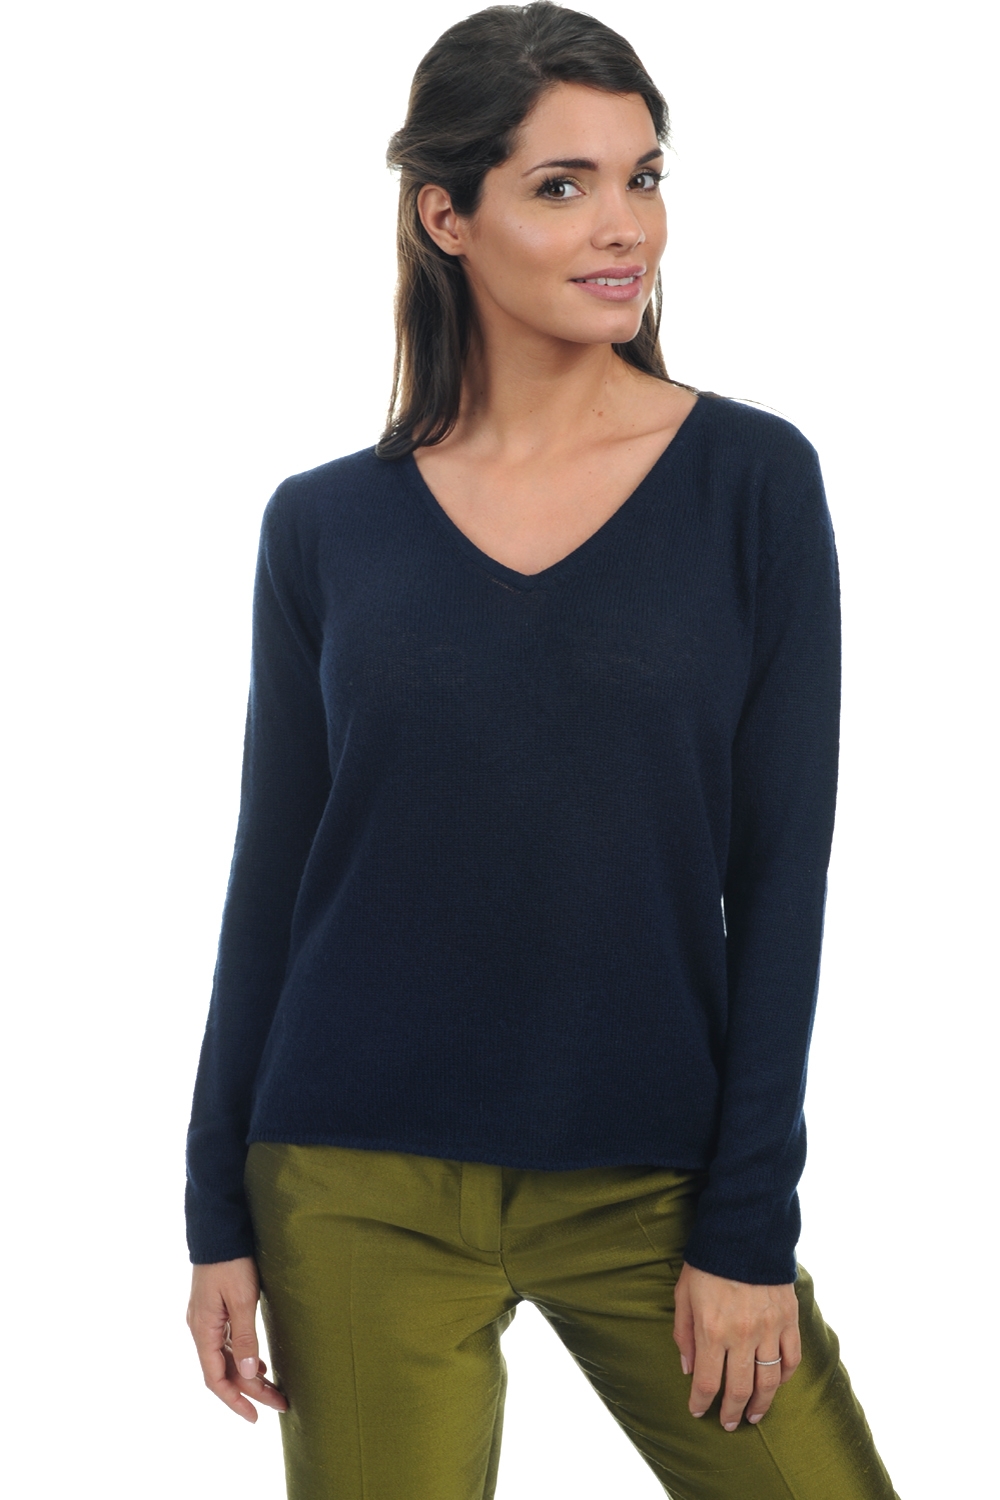 Cashmere ladies basic sweaters at low prices flavie dress blue xs